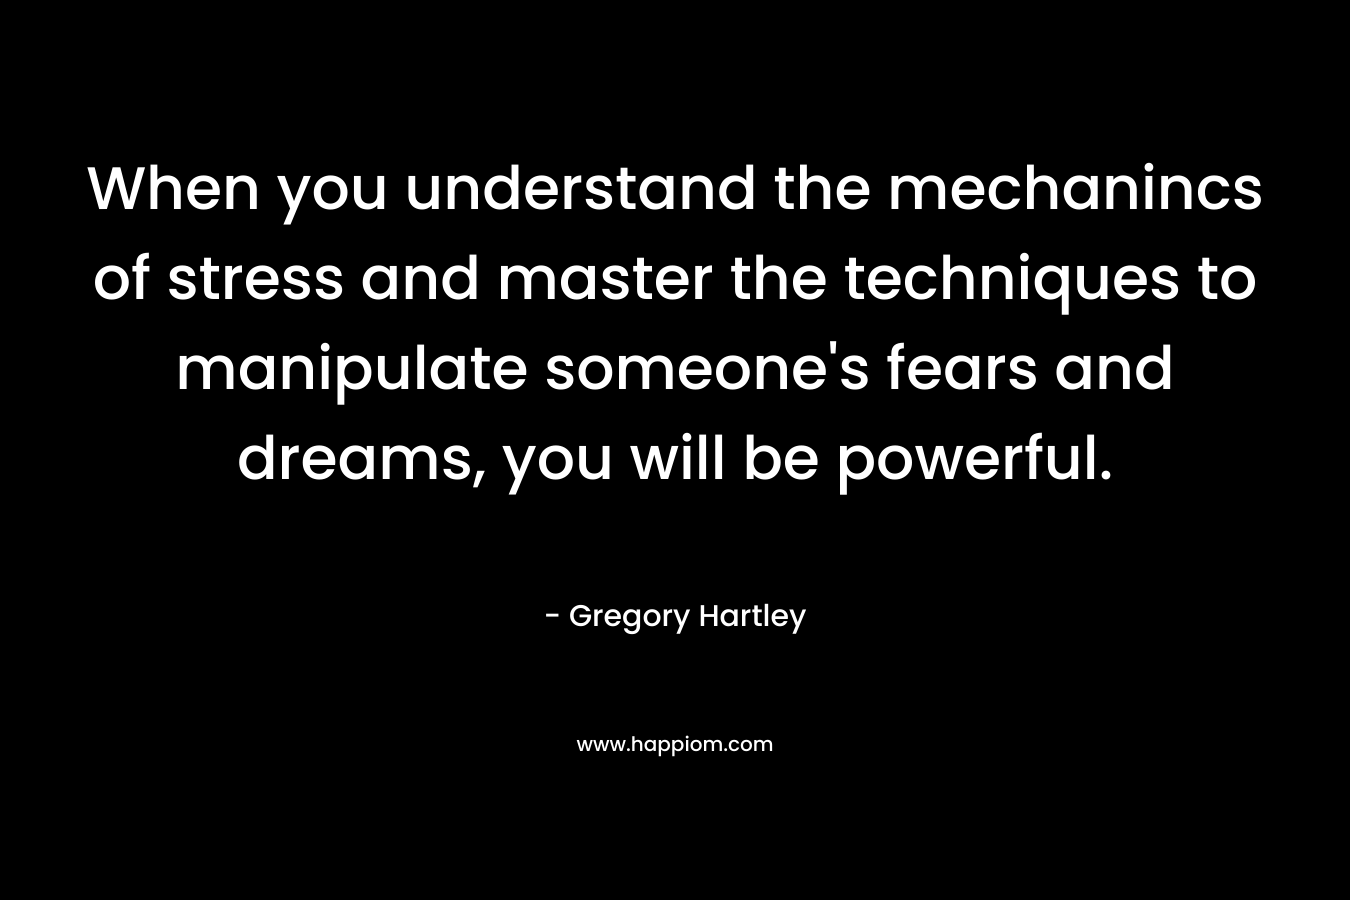 When you understand the mechanincs of stress and master the techniques to manipulate someone’s fears and dreams, you will be powerful. – Gregory Hartley